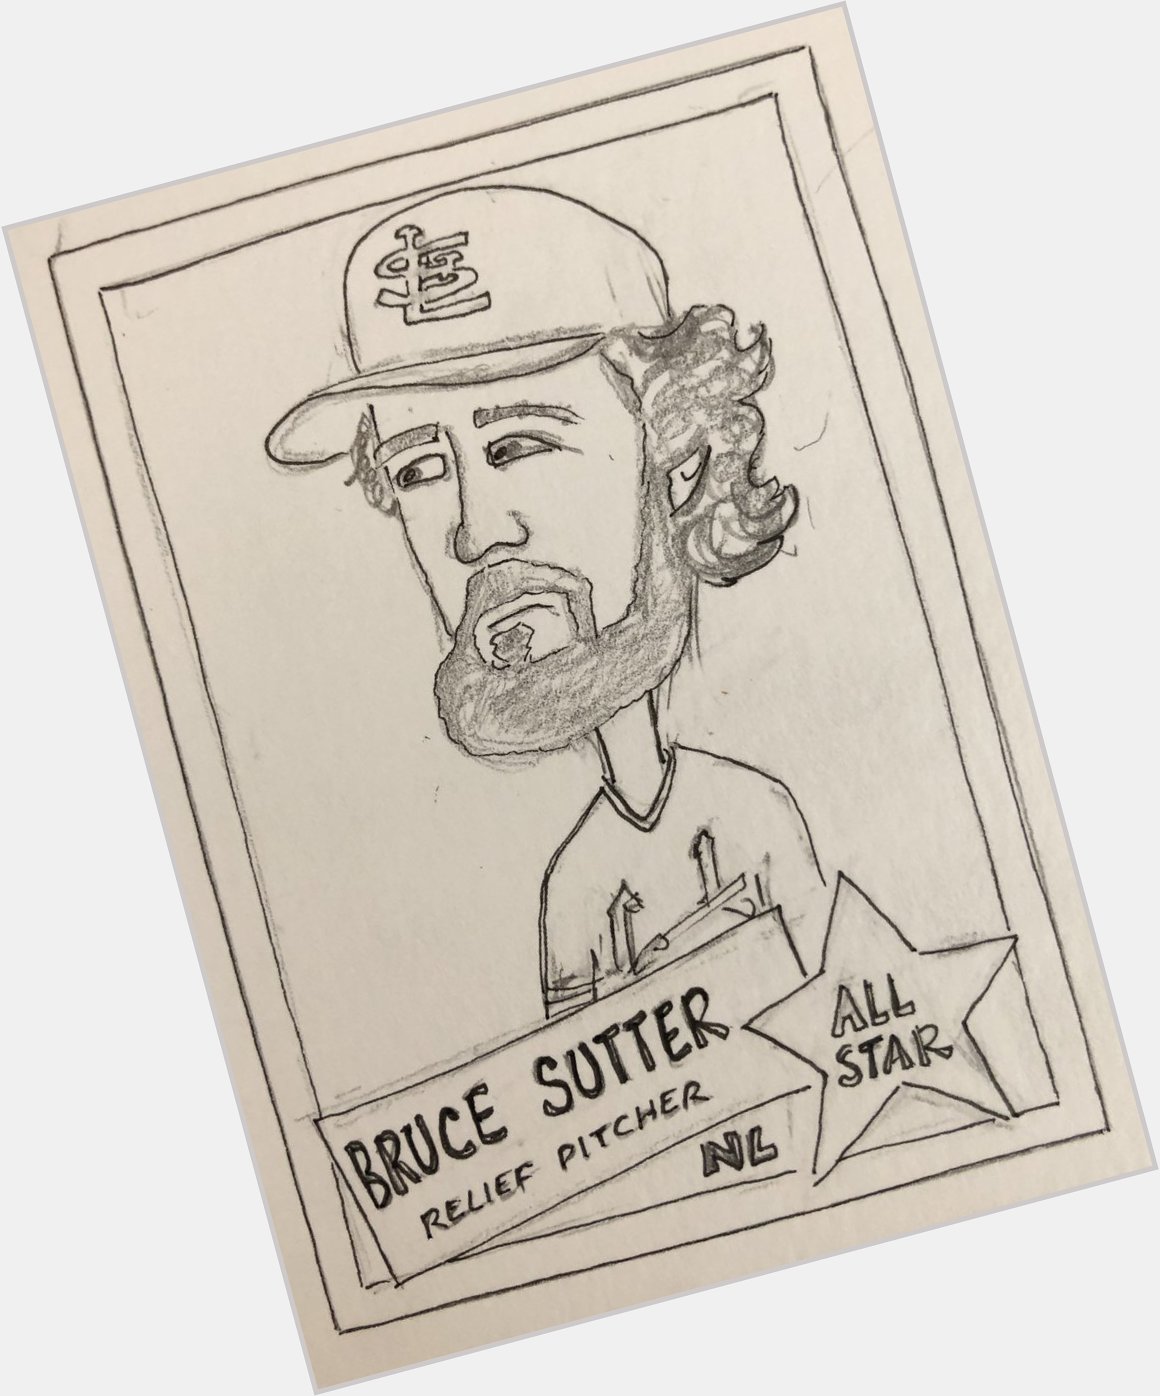 Happy Birthday Bruce Sutter. There is a storage locker in a Miami suburb with 47 Fireman of the Year helmets. 